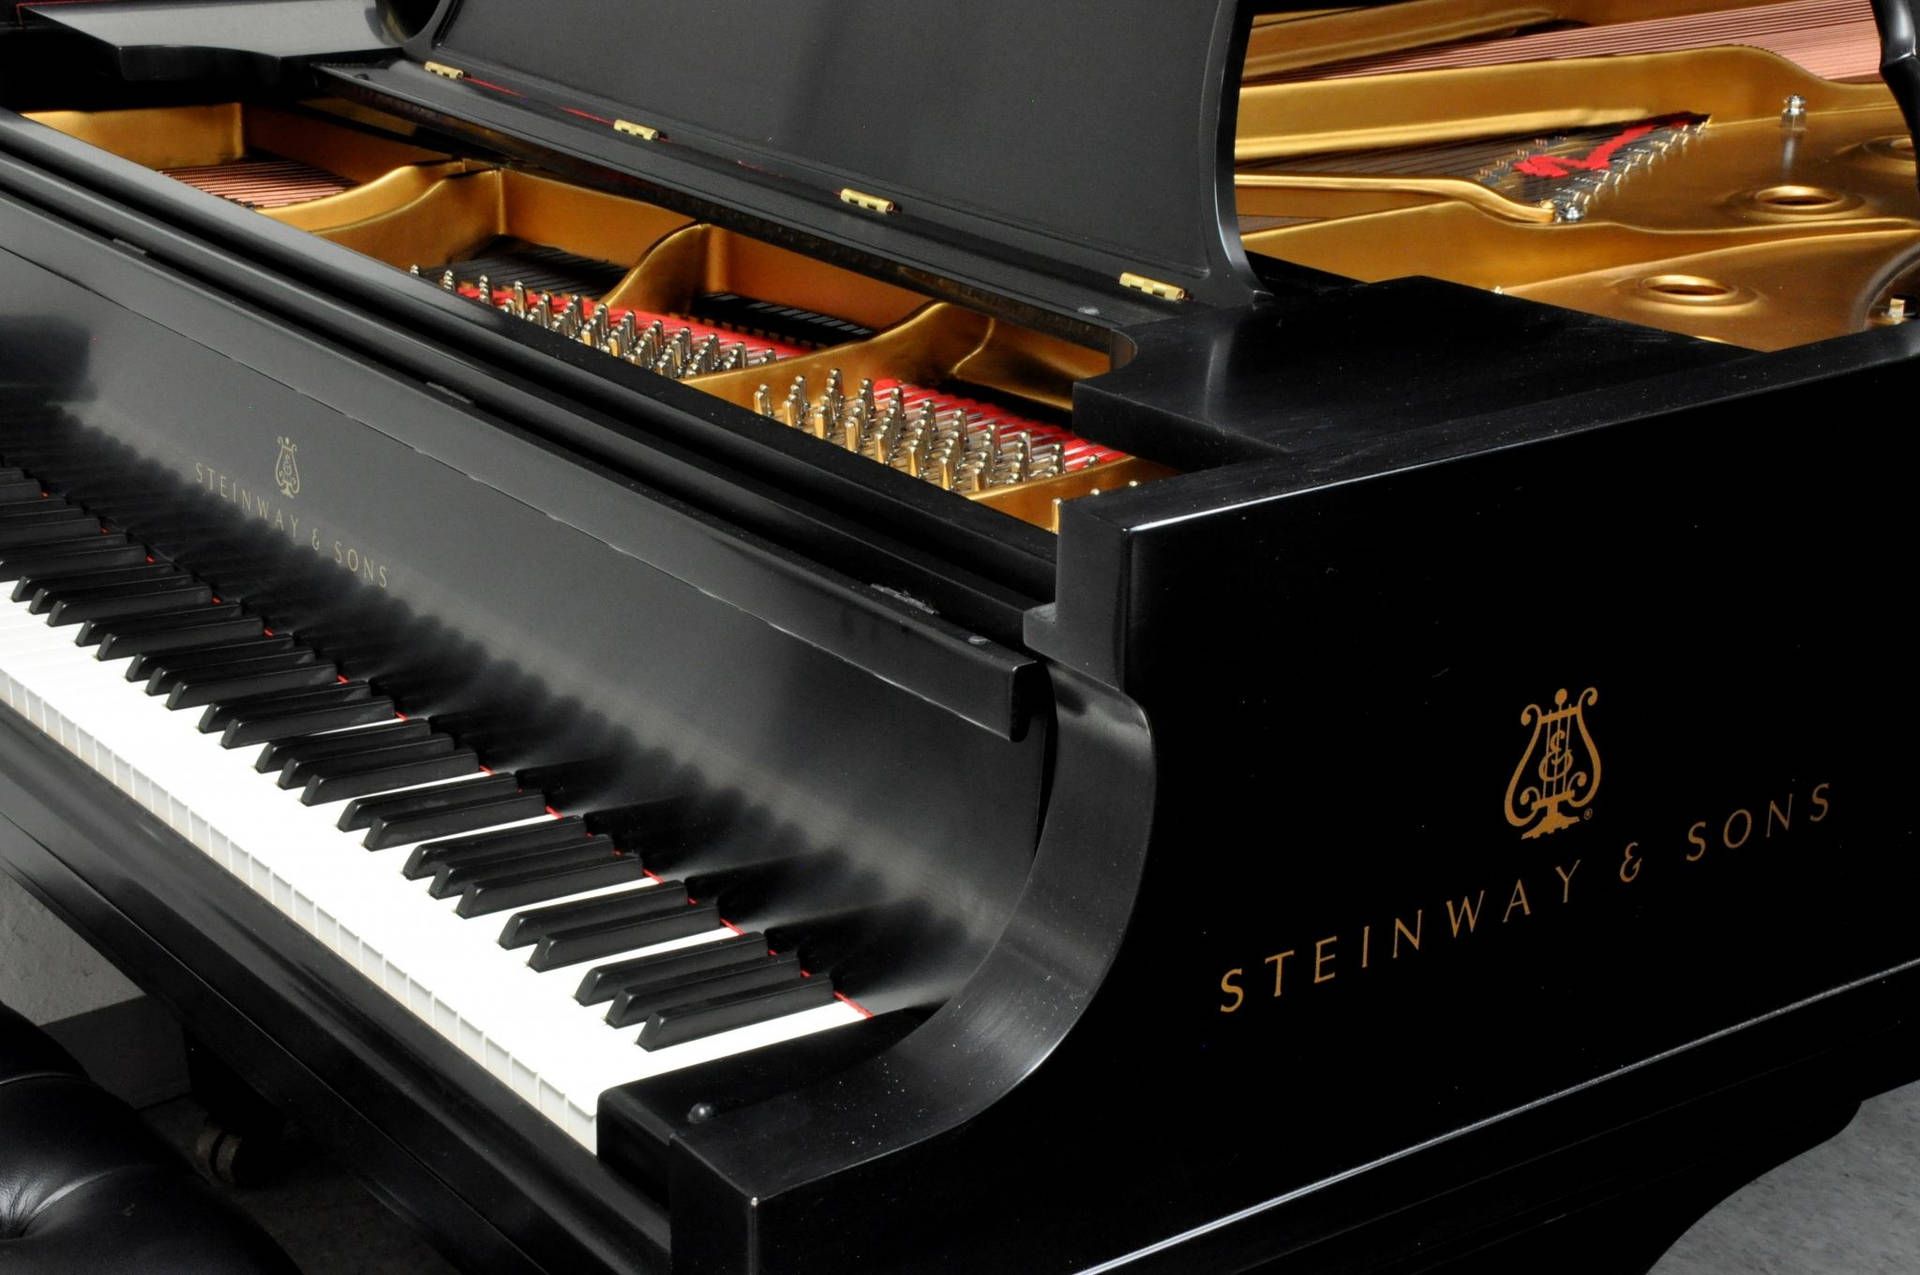 A black piano with the name steinway & sons on it - Piano